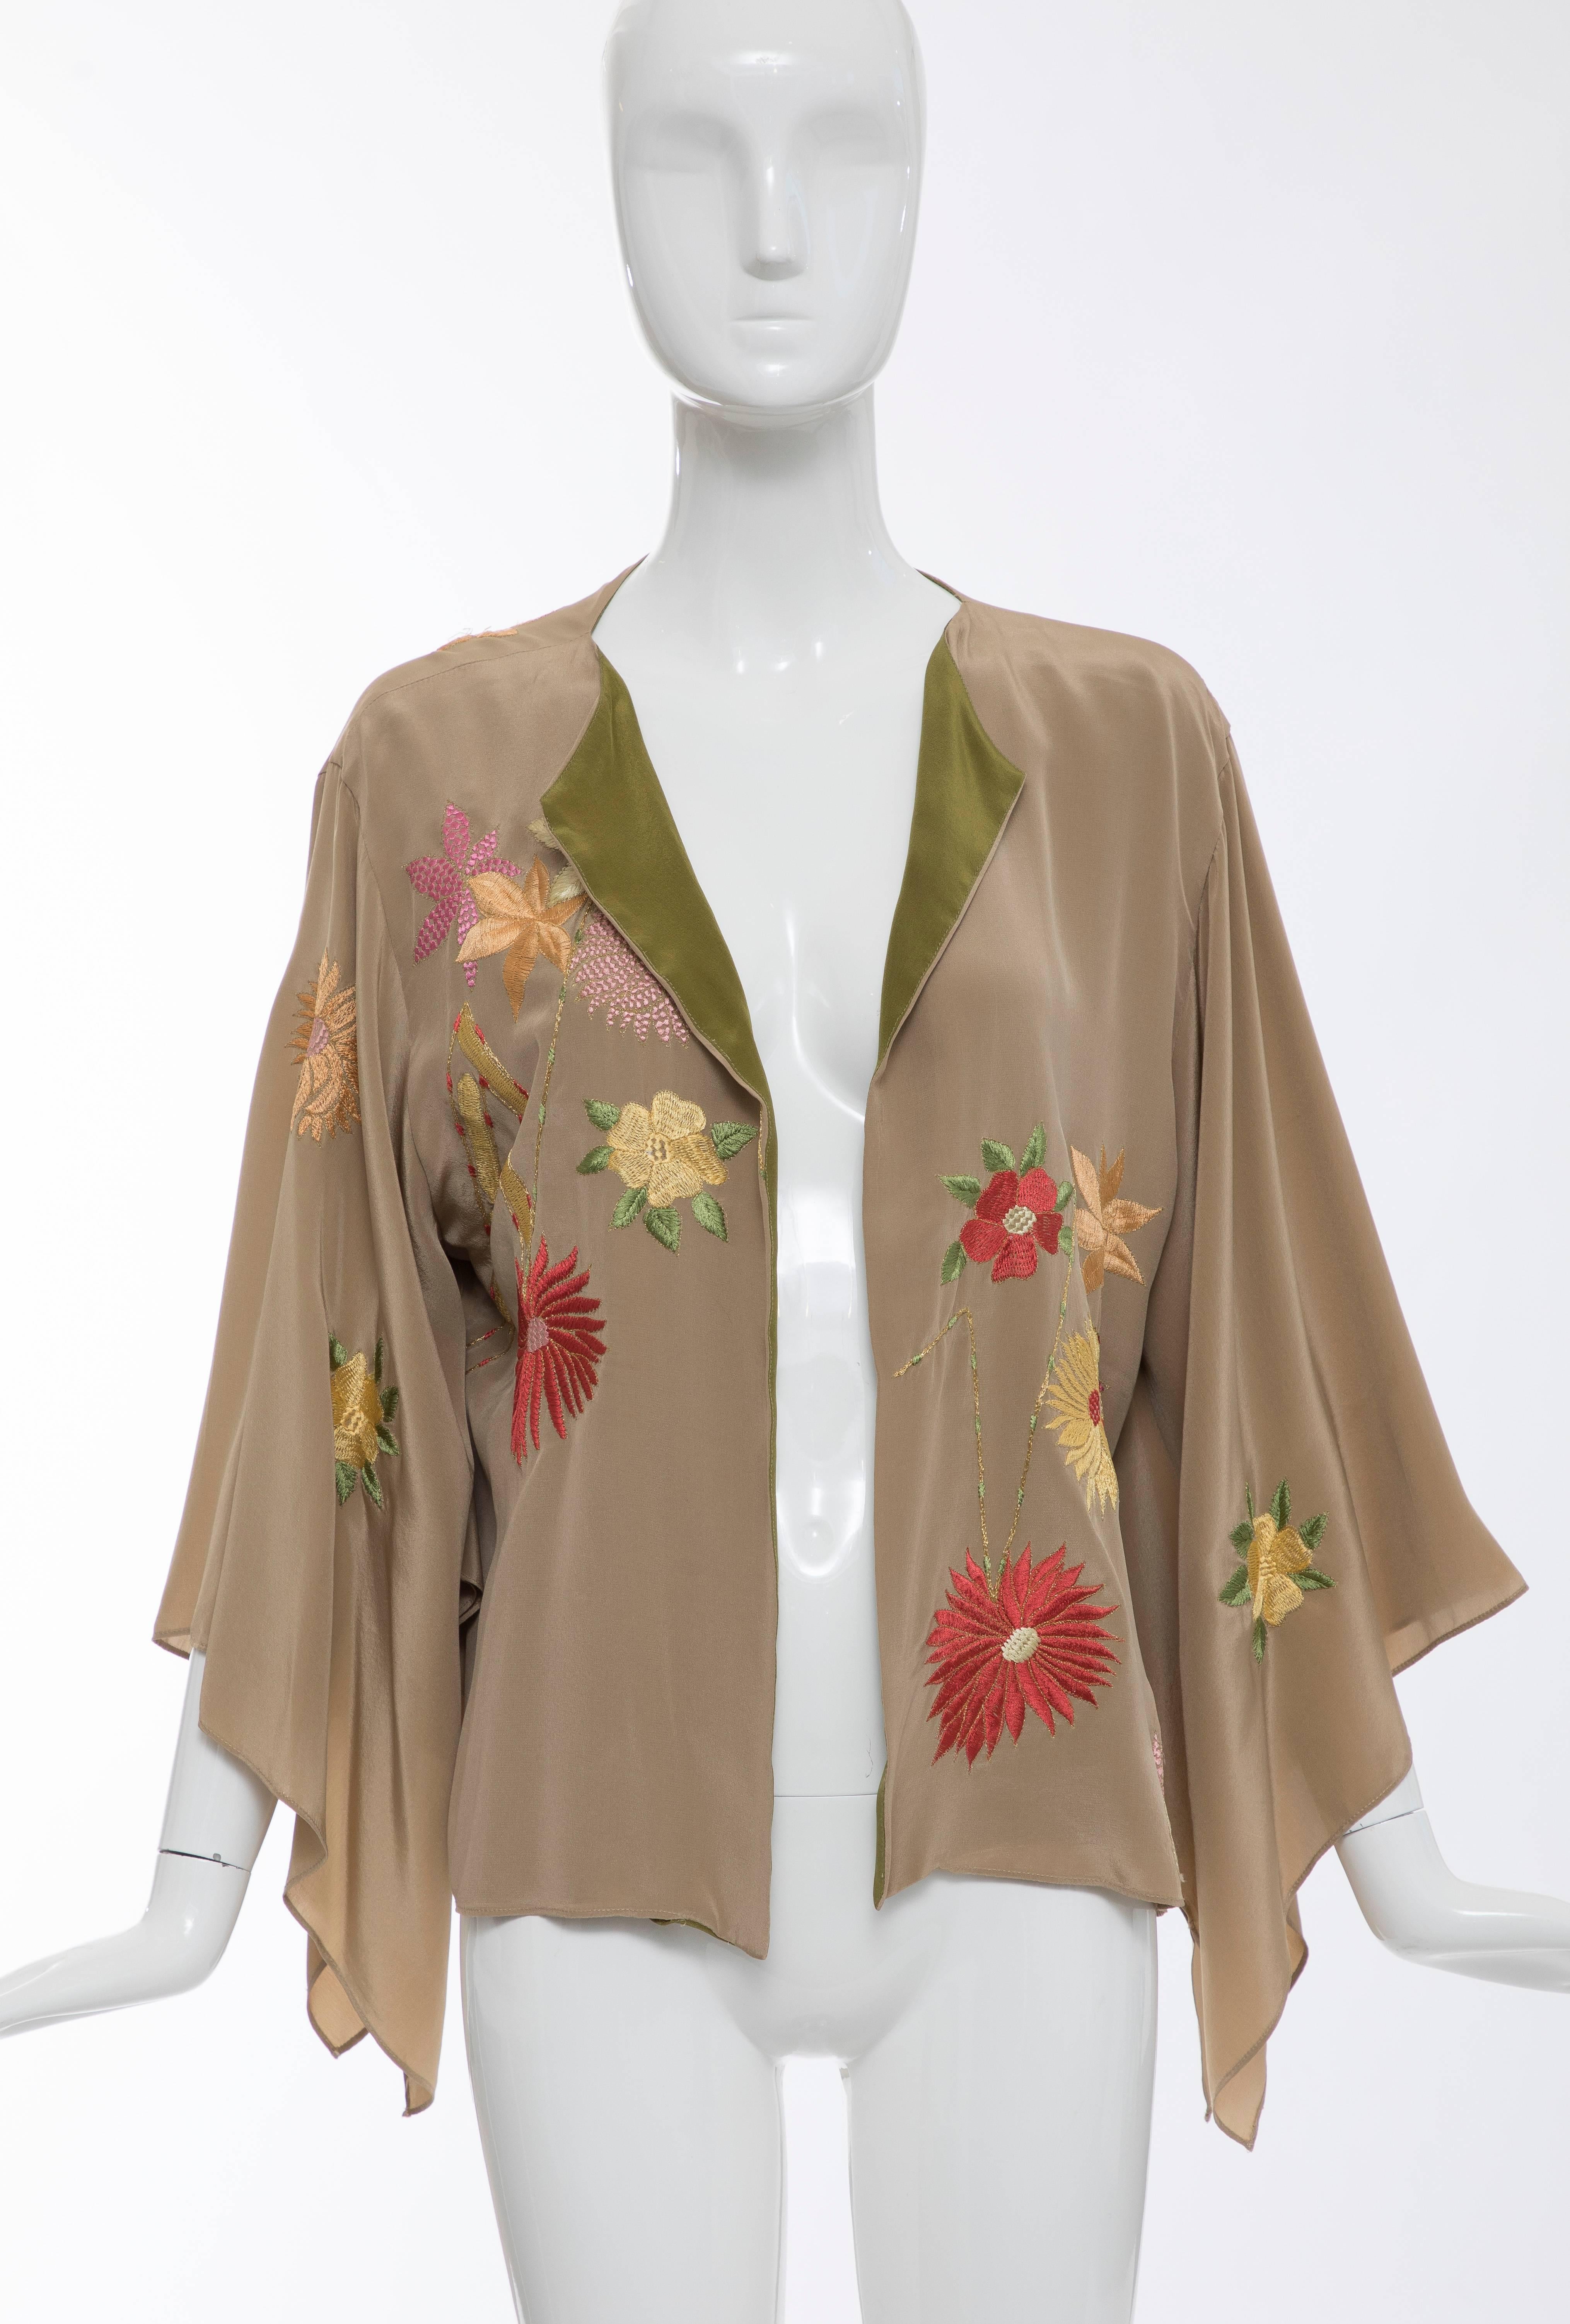 Natori, Spring-Summer 2005 silk floral embroidered kimono jacket with silk olive green lining.

One Size

Bust 42, Waist 42, Length 23.5